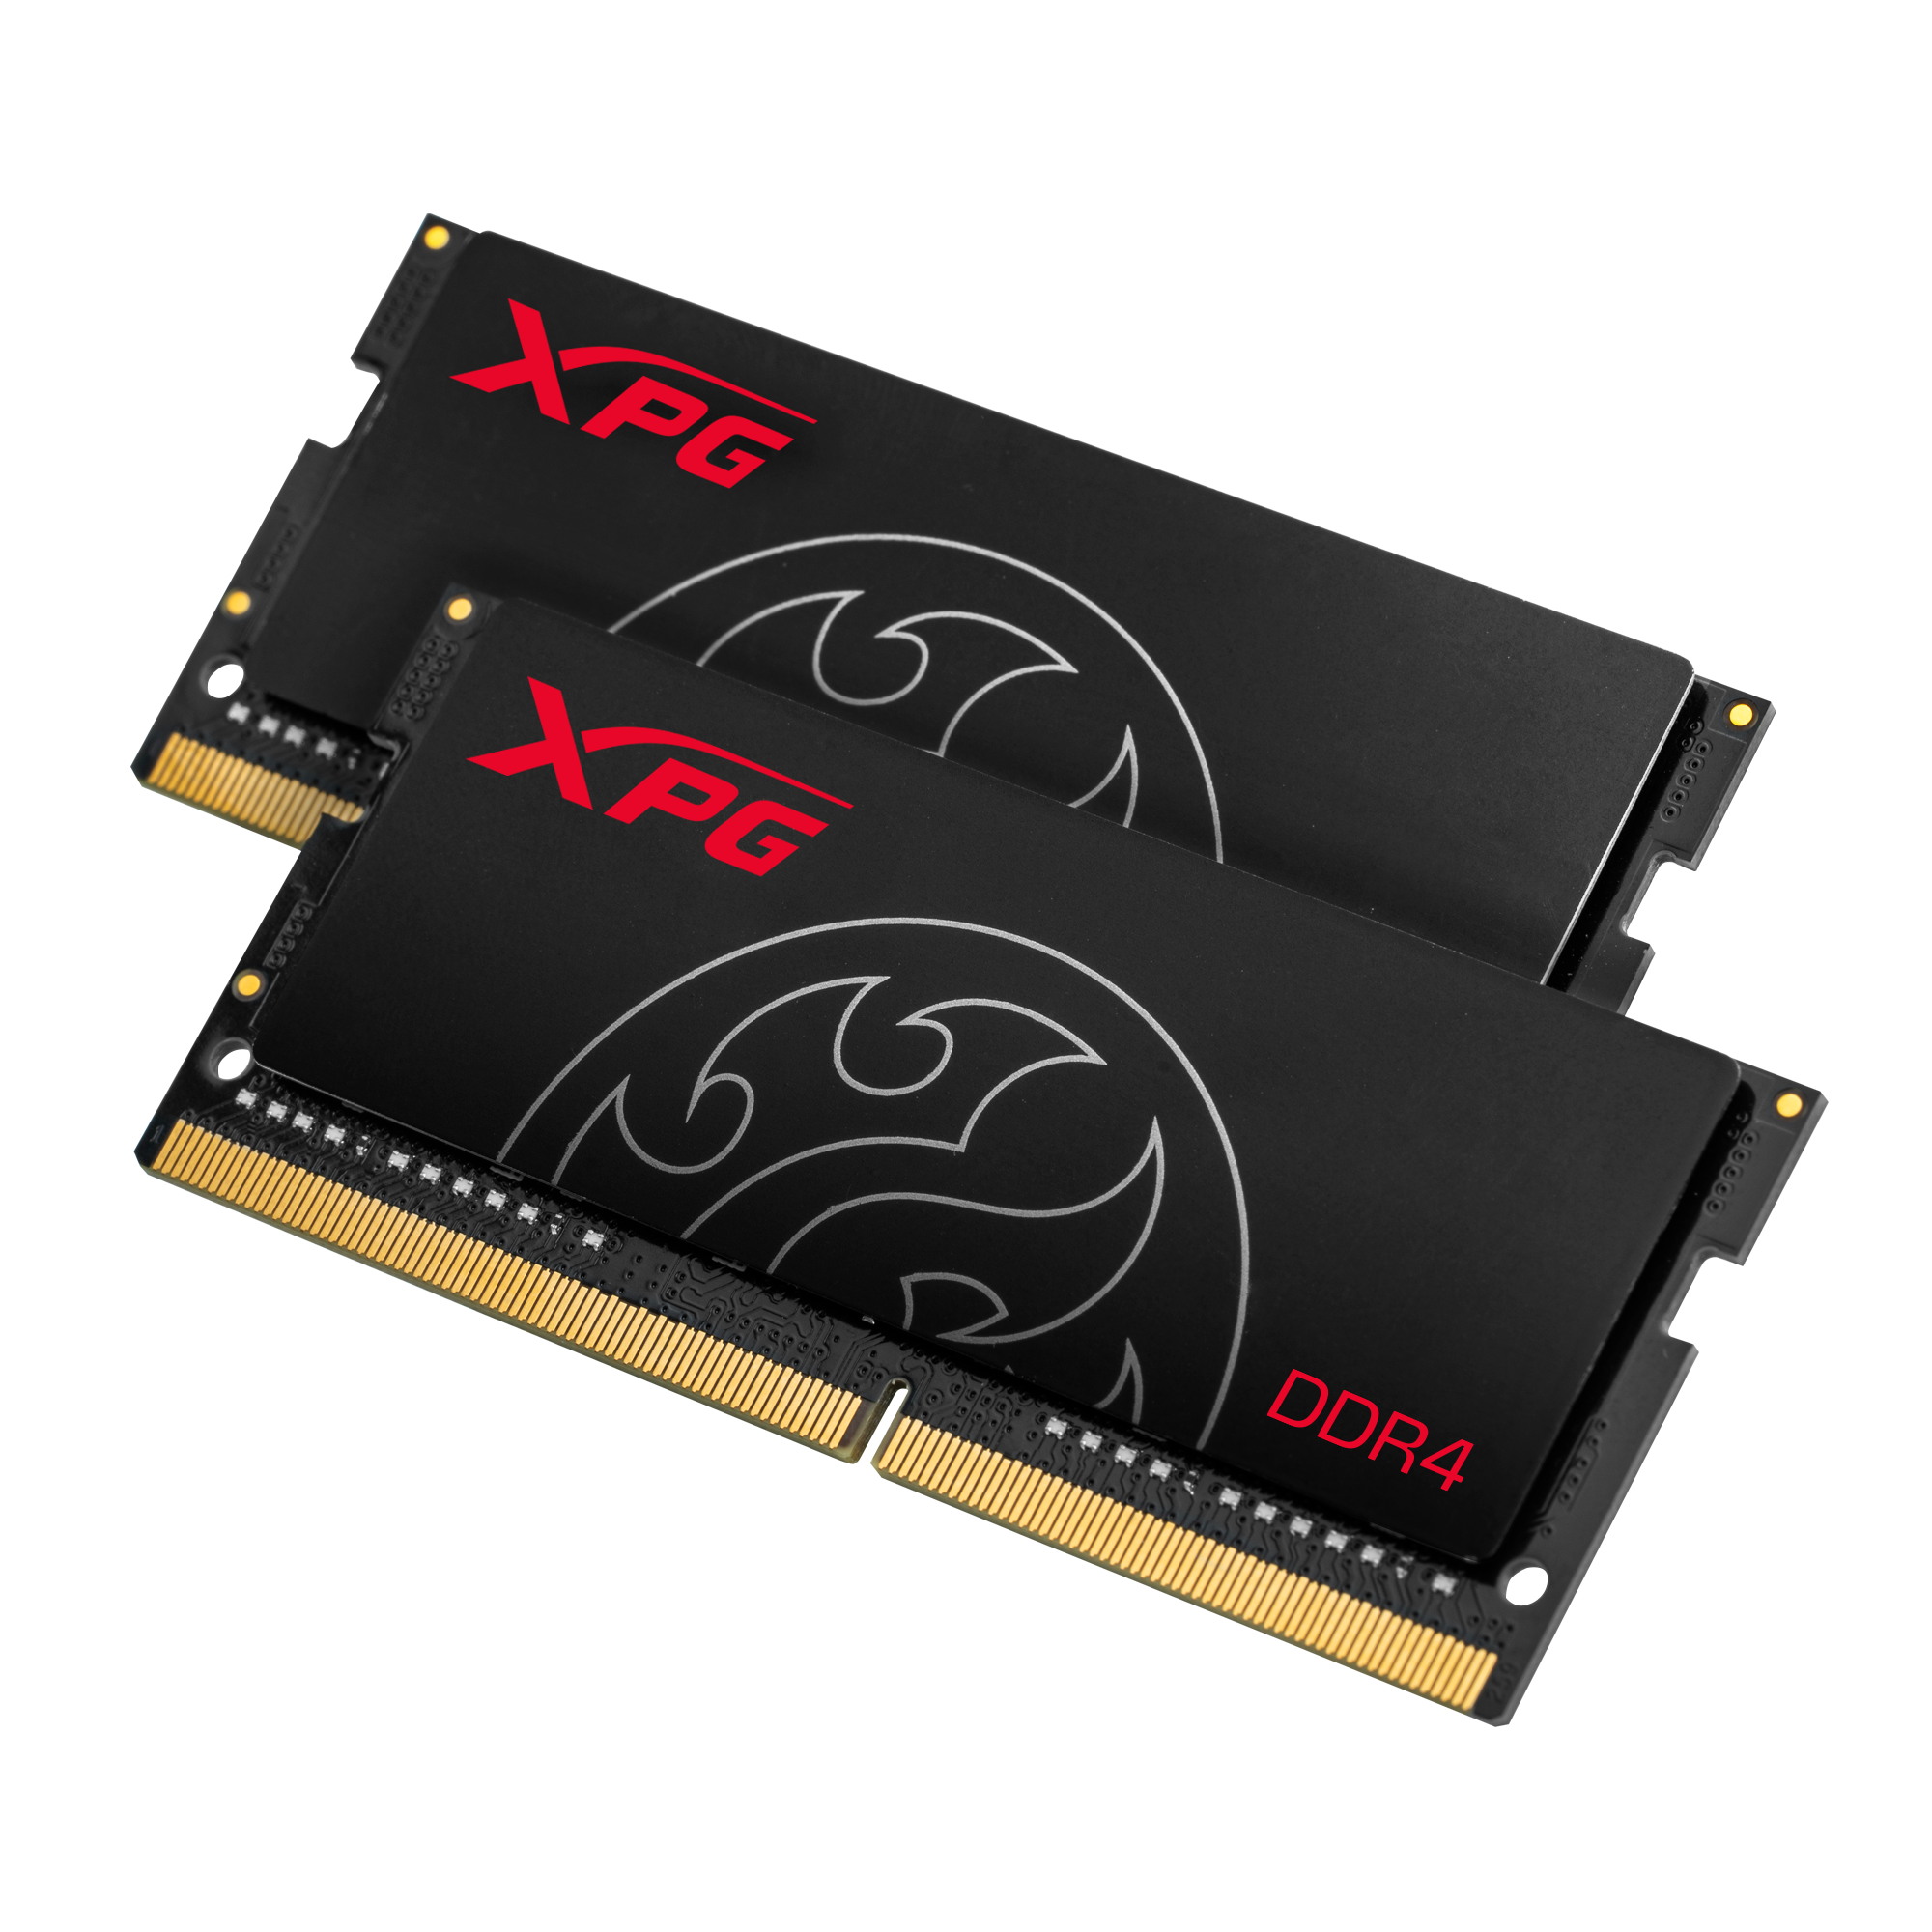 Media asset in full size related to 3dfxzone.it news item entitled as follows: Gaming & Overclocking: ADATA introduce i moduli di memoria XPG Hunter DDR4 | Image Name: news30287_XPG-Hunter-DDR4_2.png